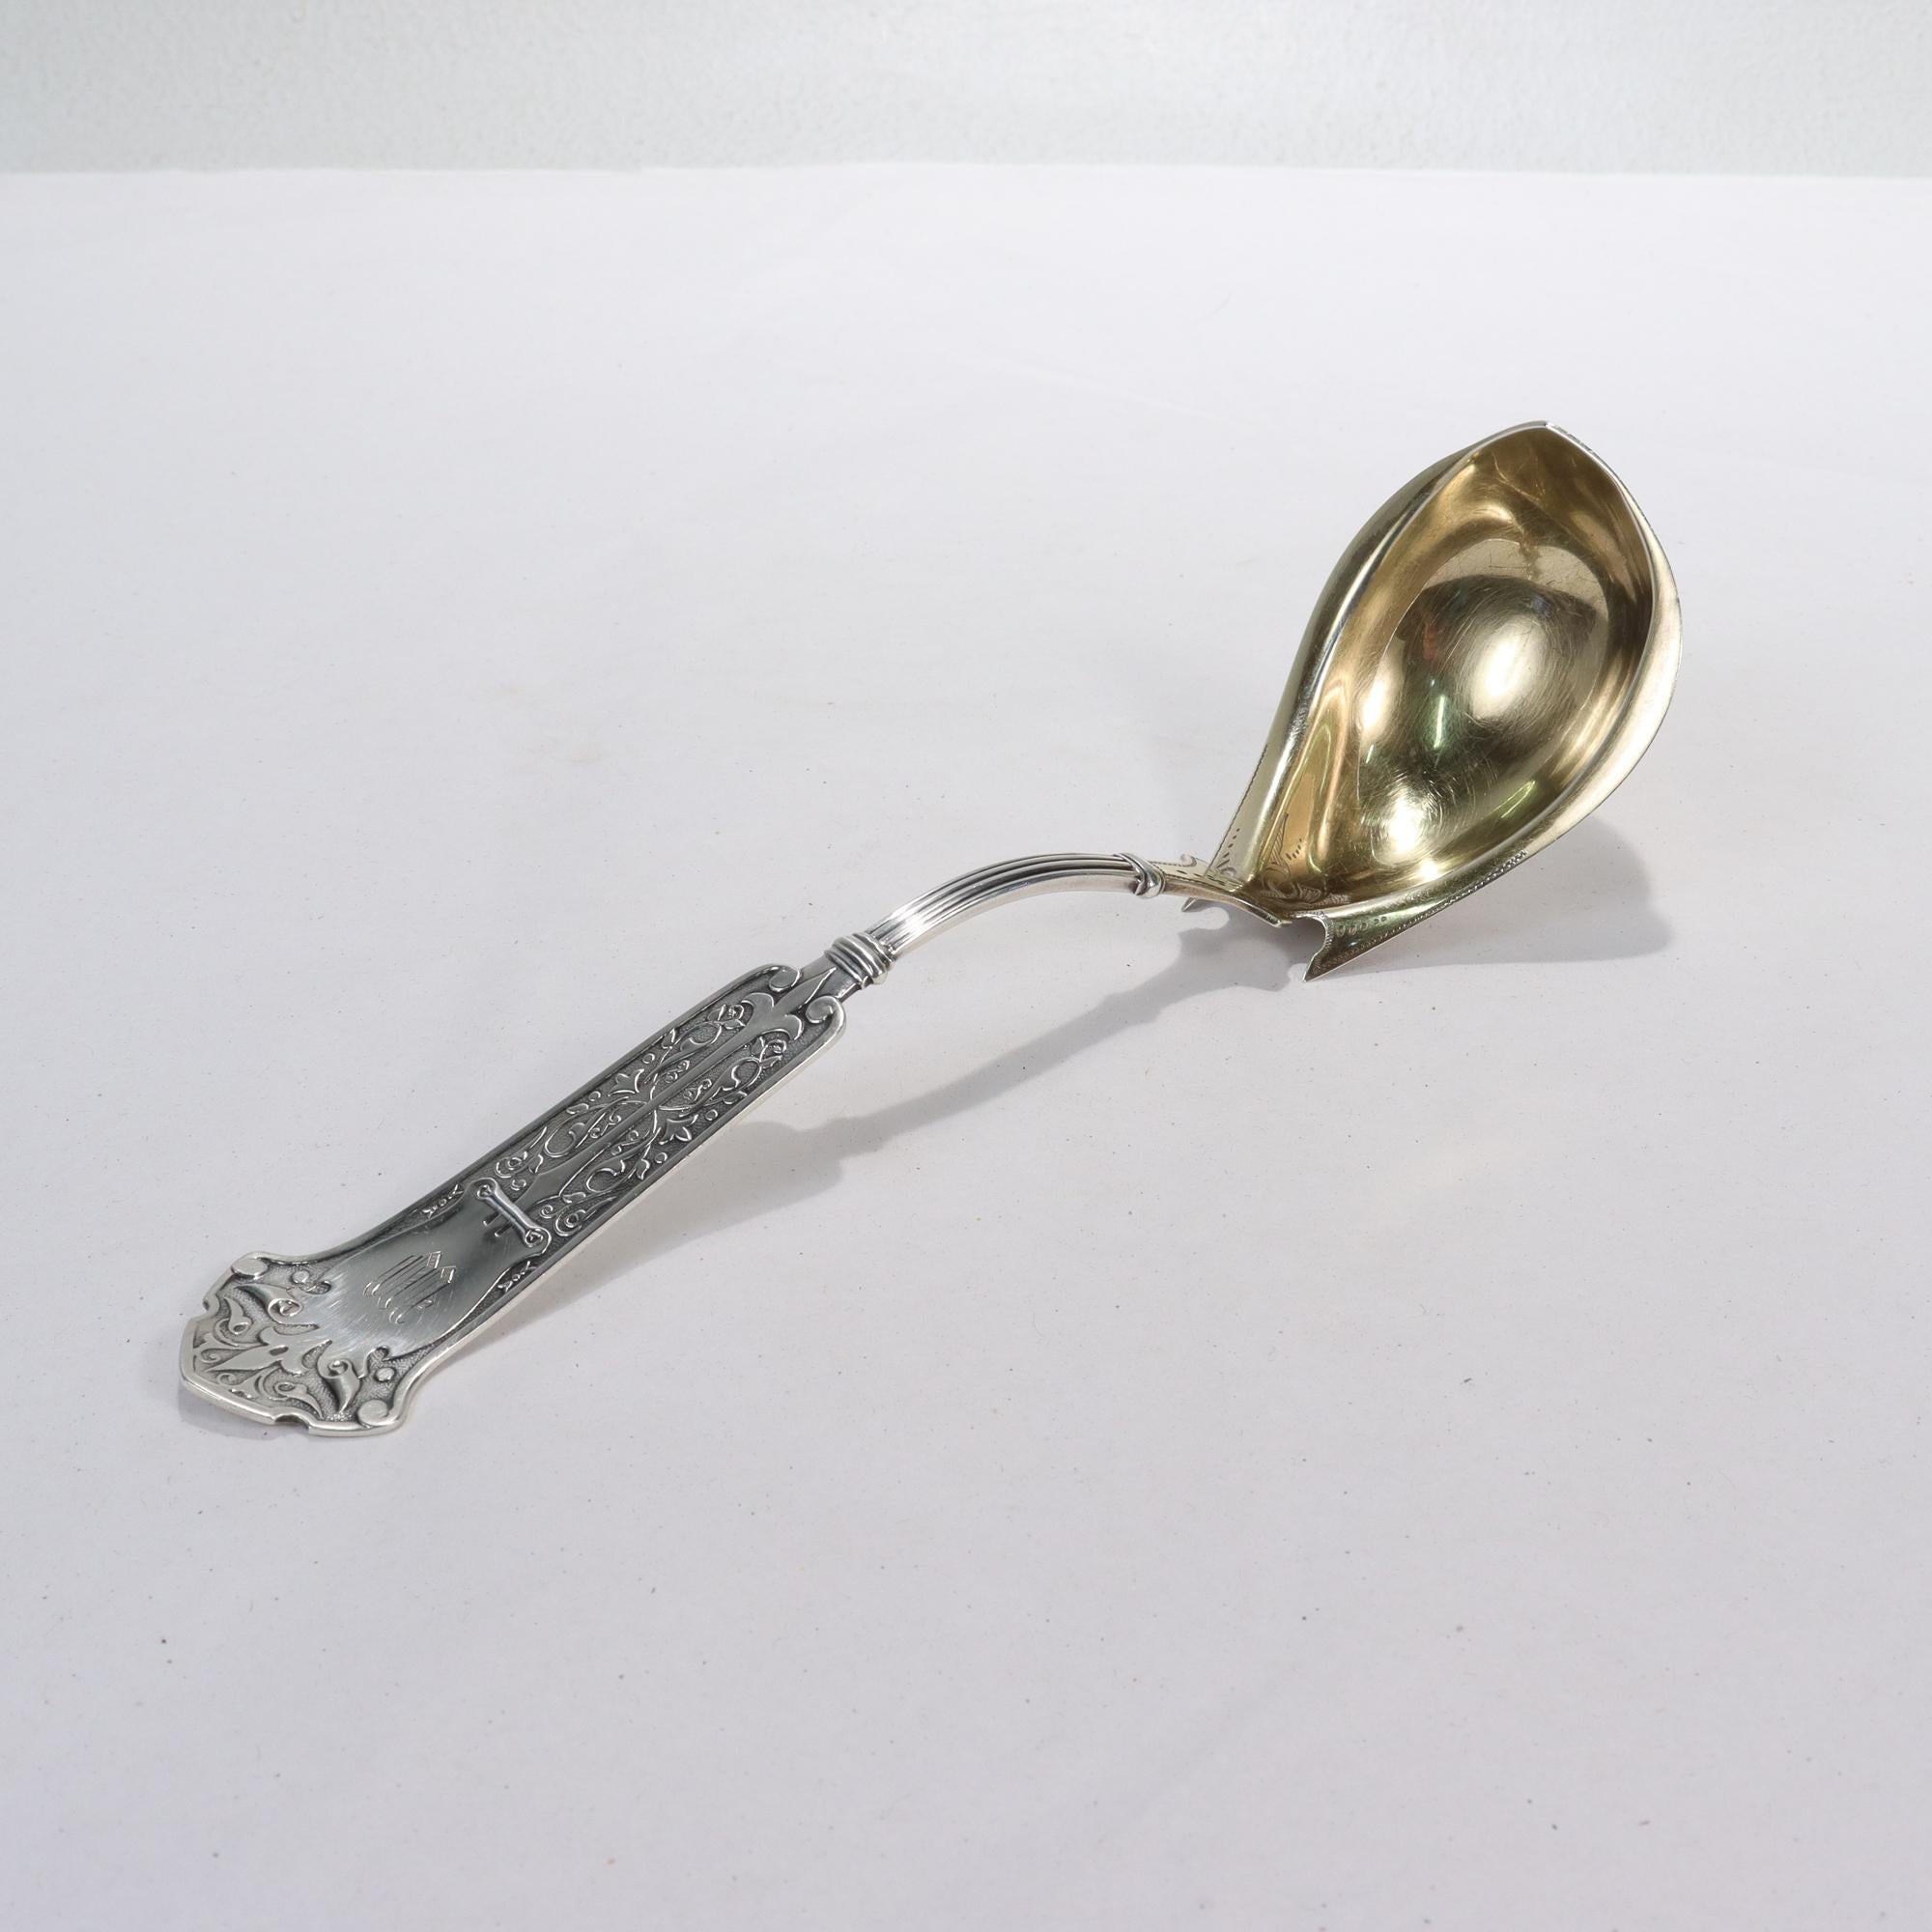 A fine antique antique American silver ladle.

By George B Sharp of Philadelphia, PA.

In coin silver.

With a gilding to both the bowl and an embossed arabesque pattern to the handle.

Simply a fine Sharp example!

Date:
Mid-19th Century

Overall